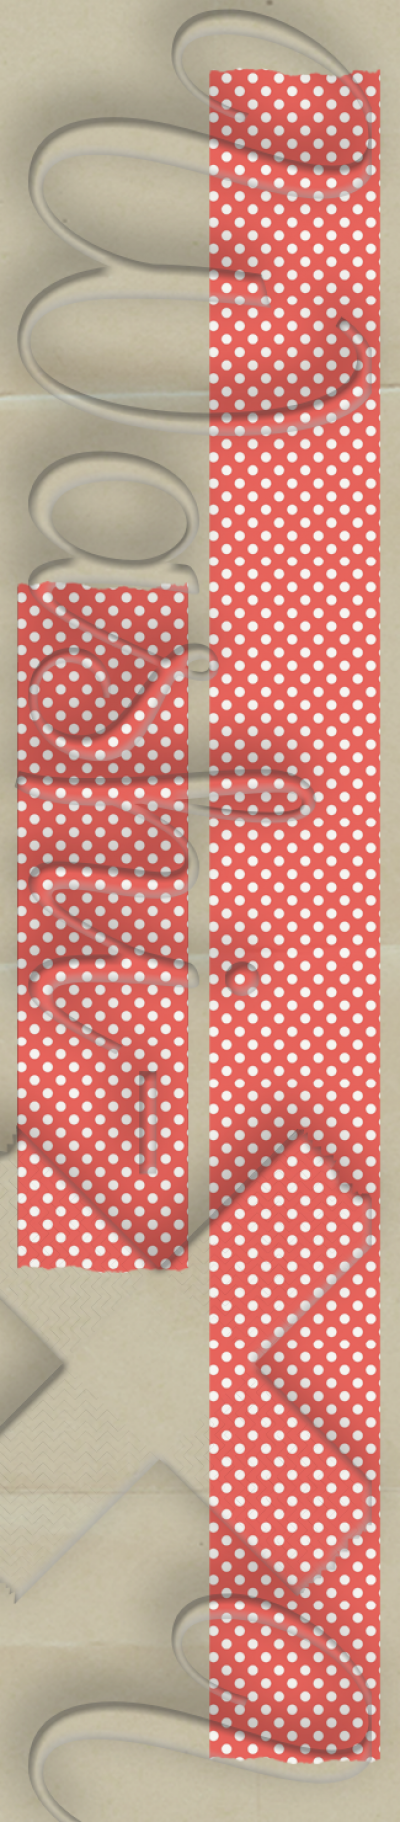 Red-White dots patterned washi tape